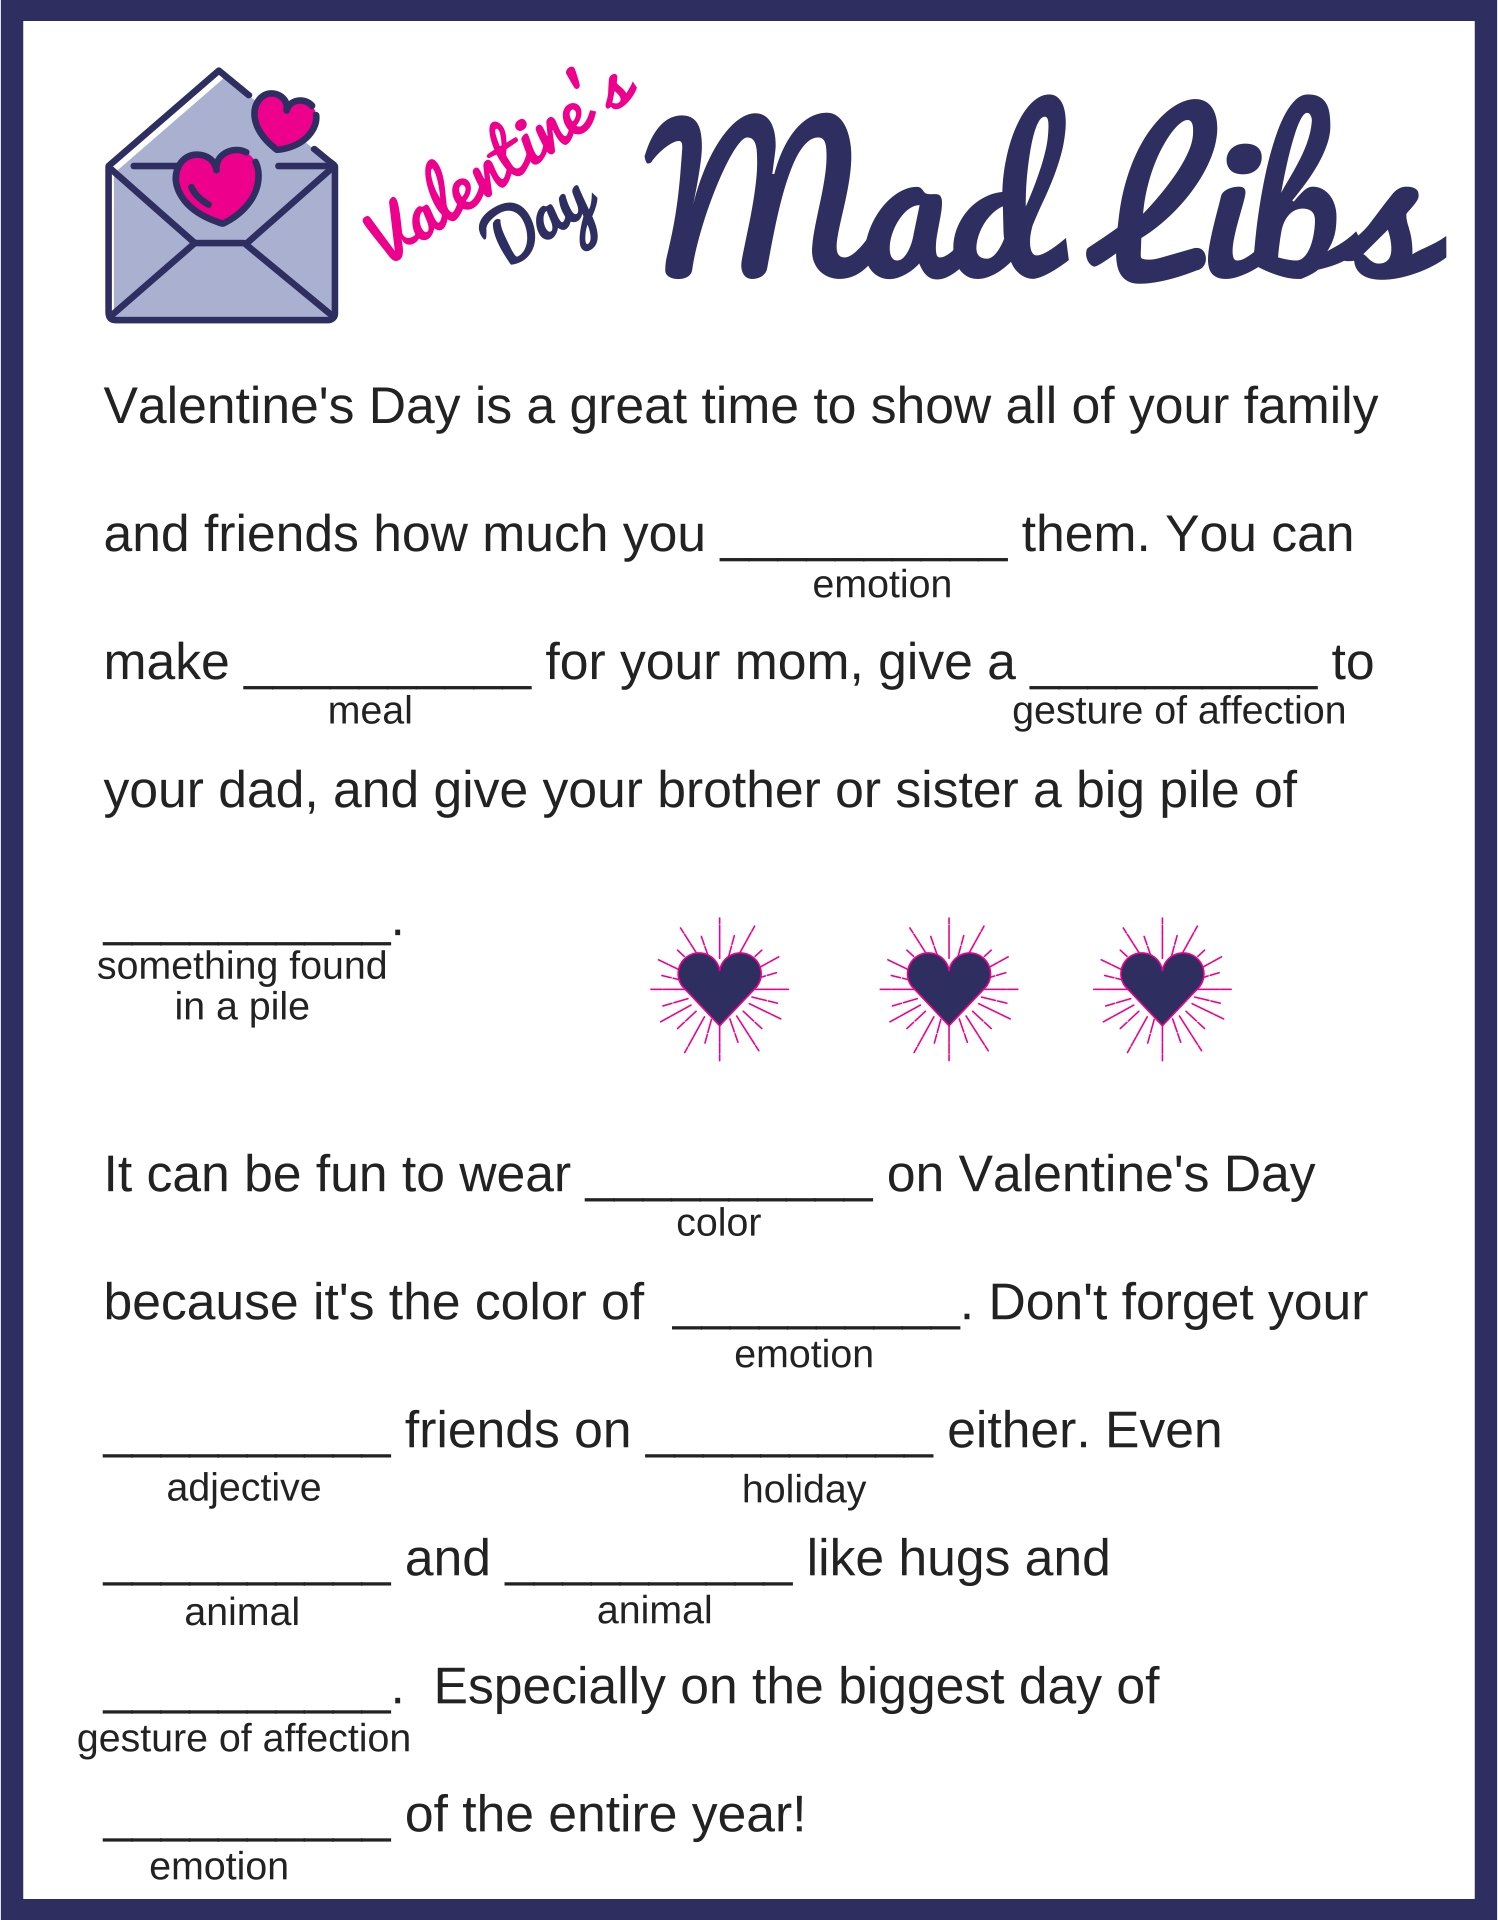 Valentines Day Mad Libs Printable